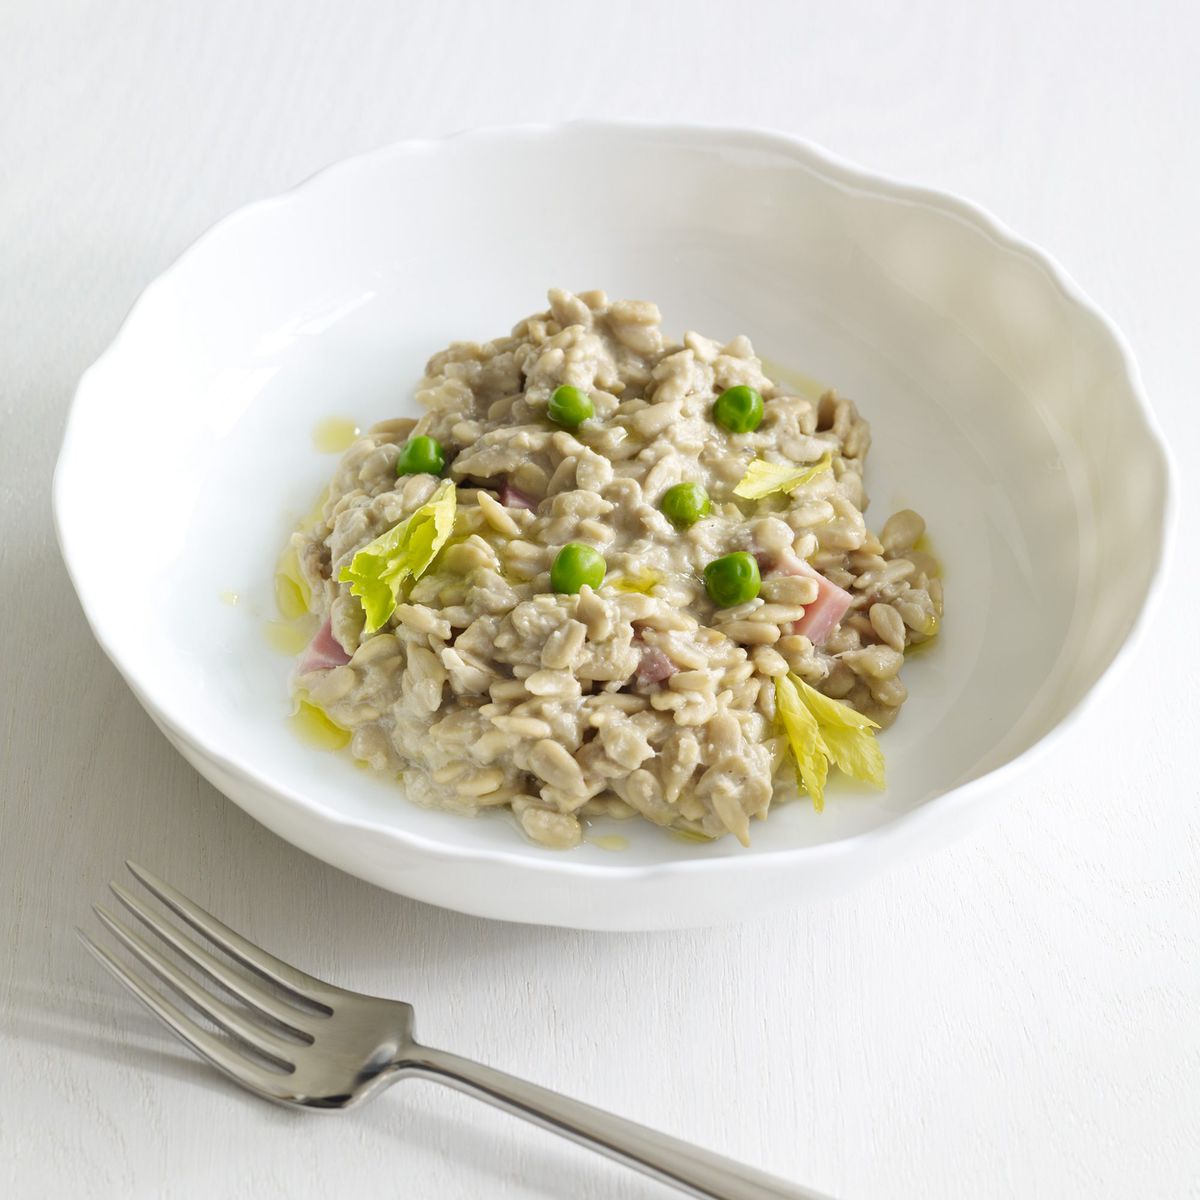 Sunflower-Seed Risotto 